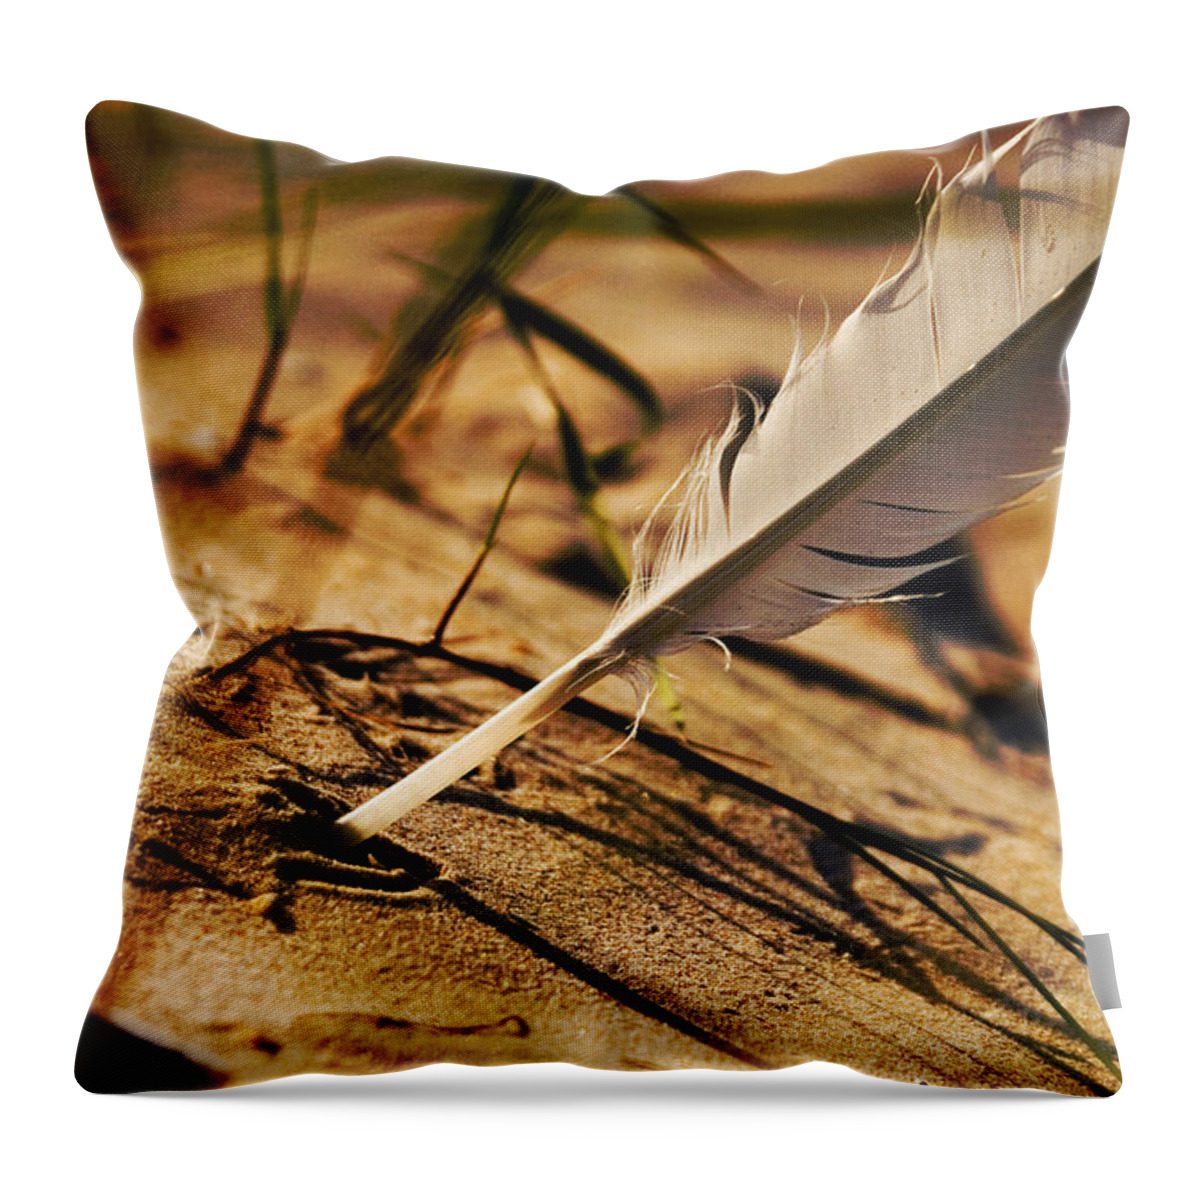 Outdoor Throw Pillow featuring the photograph Feather And Sand by Raimond Klavins